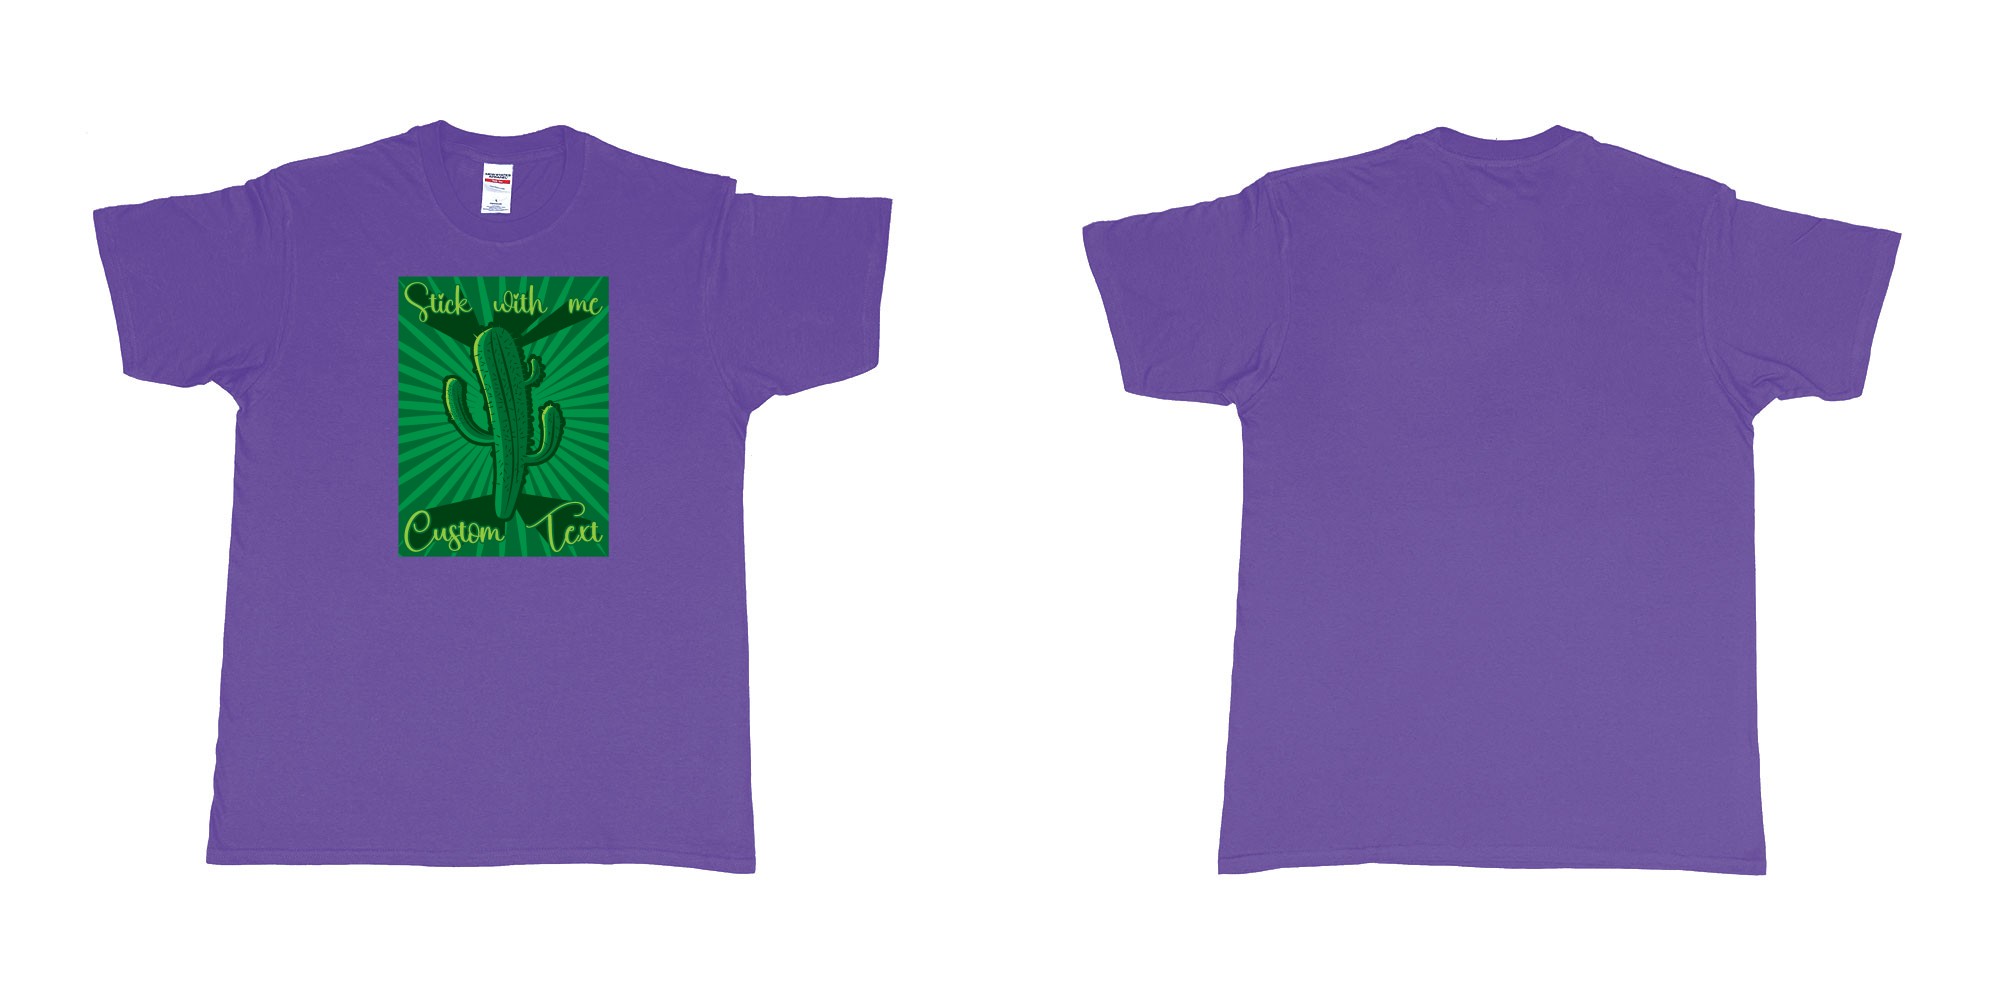 Custom tshirt design cactus stick with me in fabric color purple choice your own text made in Bali by The Pirate Way